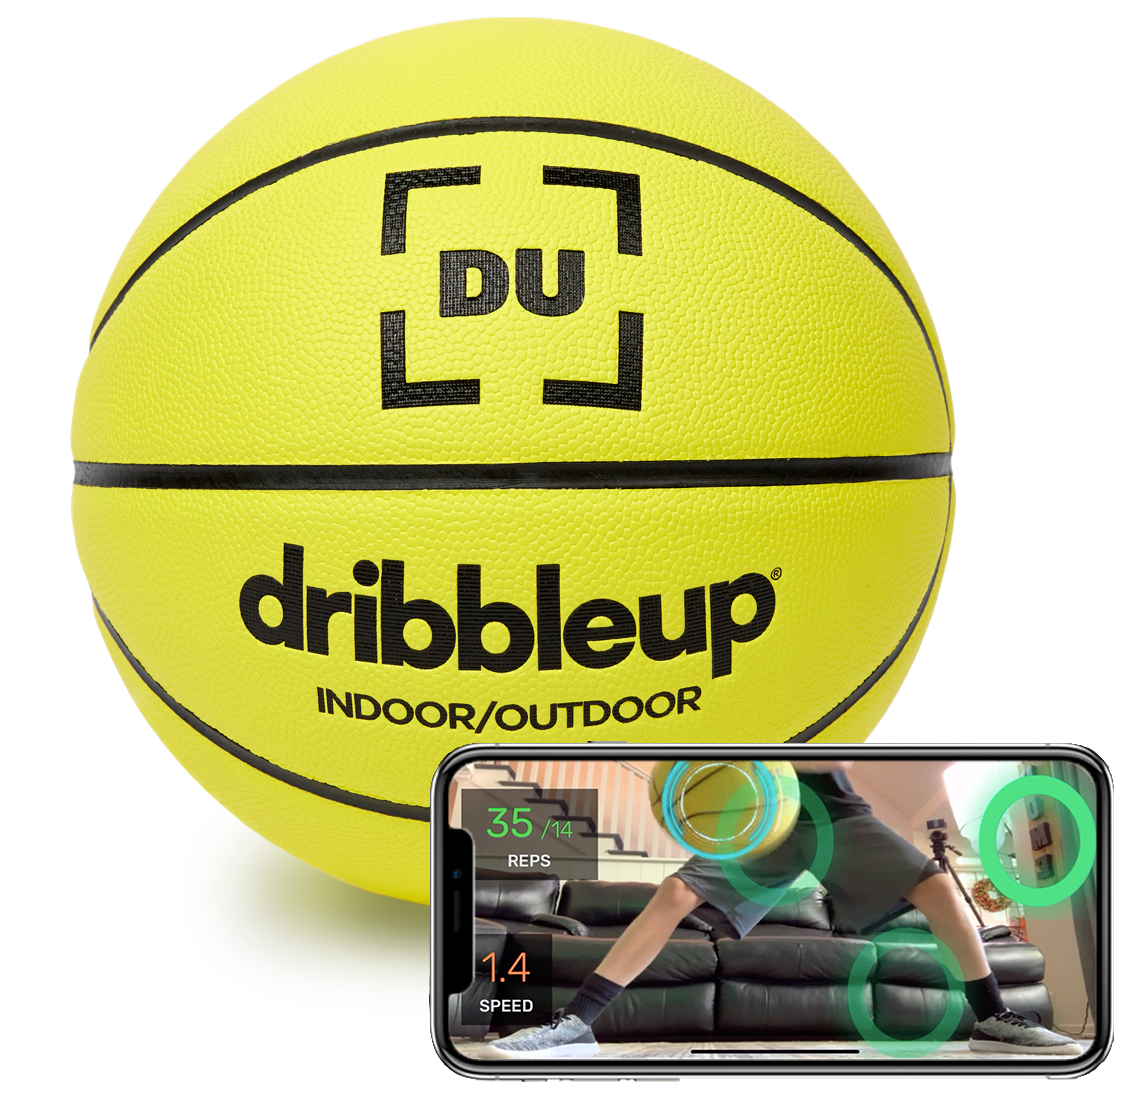 Dribbleup Smart Basketball Glow in The Dark with App Light Up Basketball Hoop Lights Outdoor Indoor Youth Basketball Accessories Ideas Gifts for Teenage Boys 